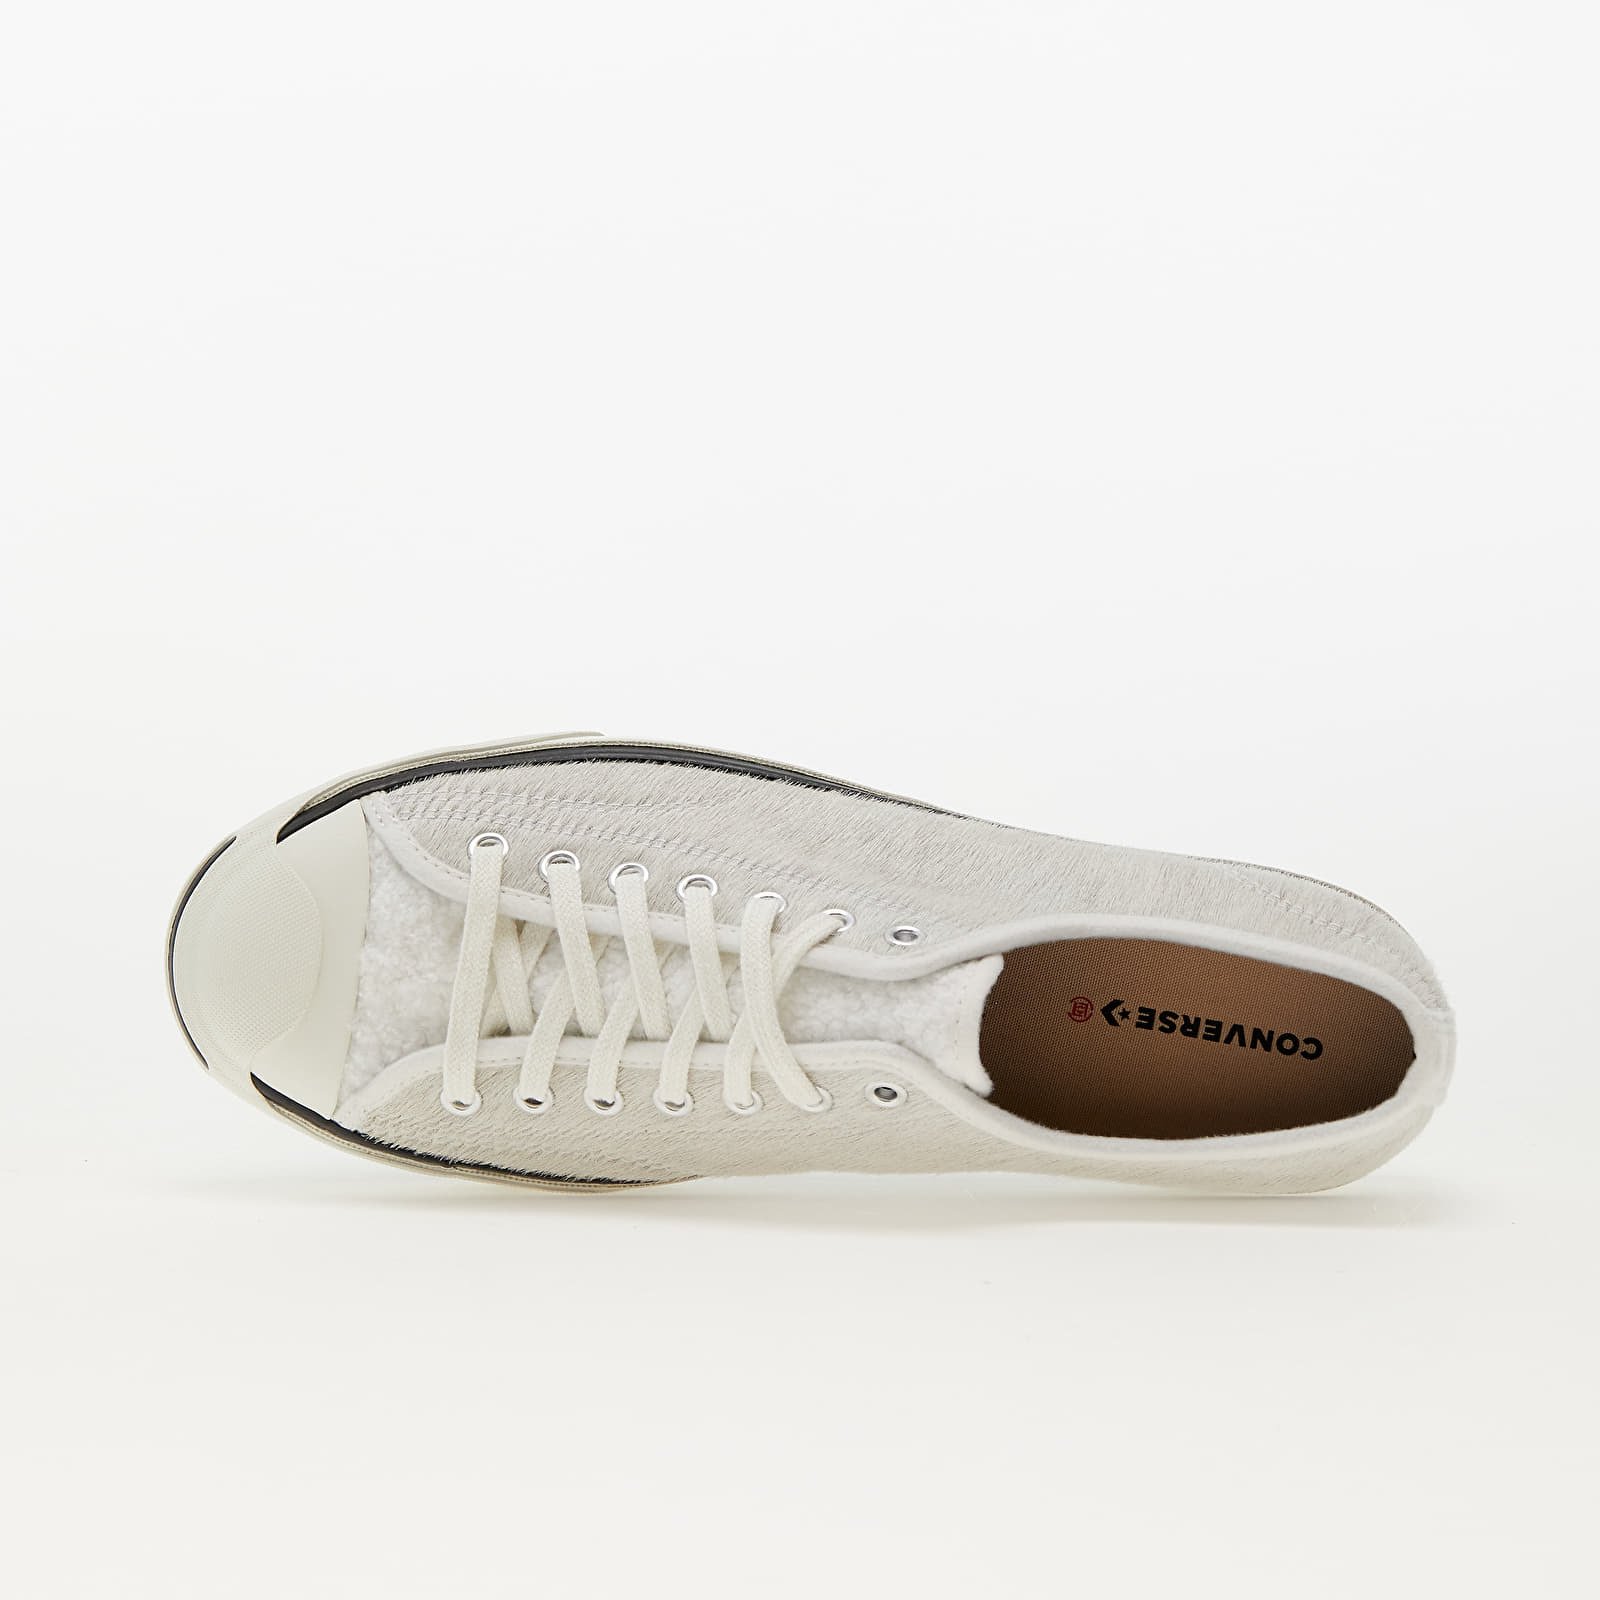 CLOT x Jack Purcell Low